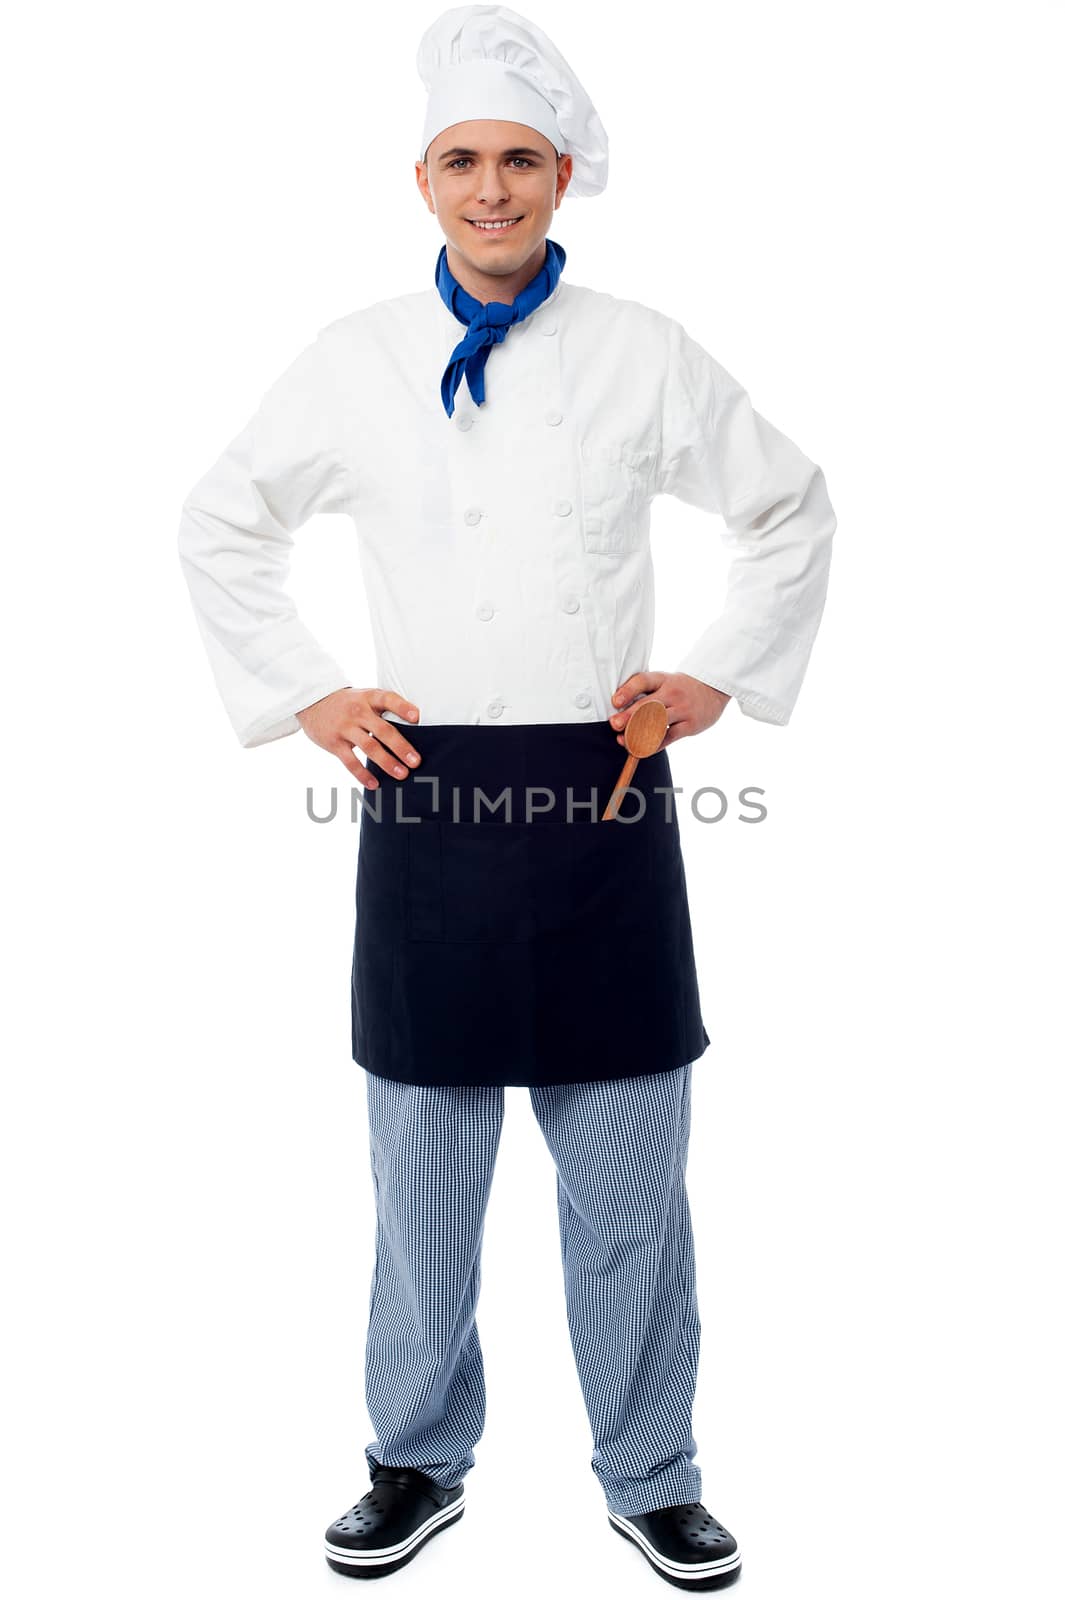 Handsome young cook posing in style over white